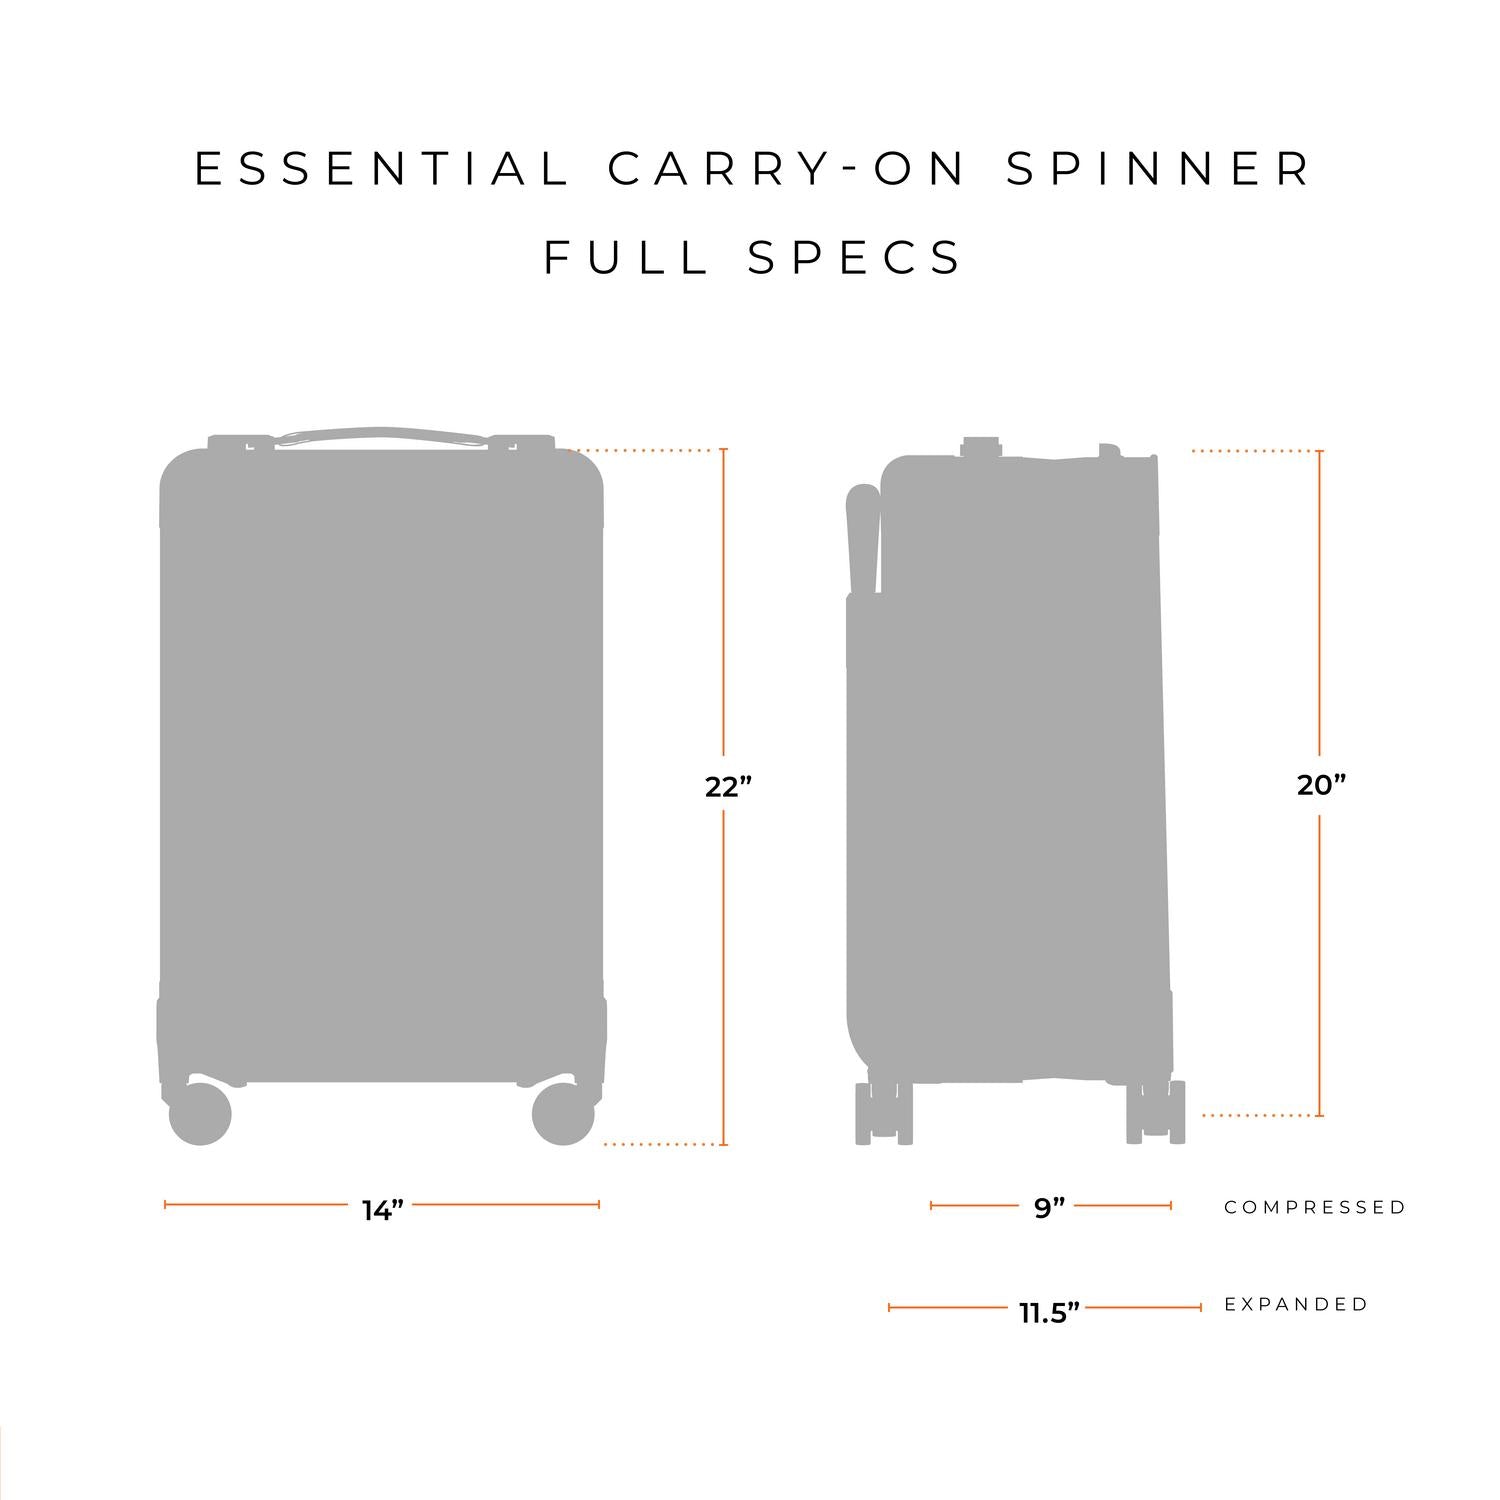 Briggs and Riley Essential Carry-On Spinner Full Specs 14"x22"x9" compressed or 11.5" expanded #color_navy